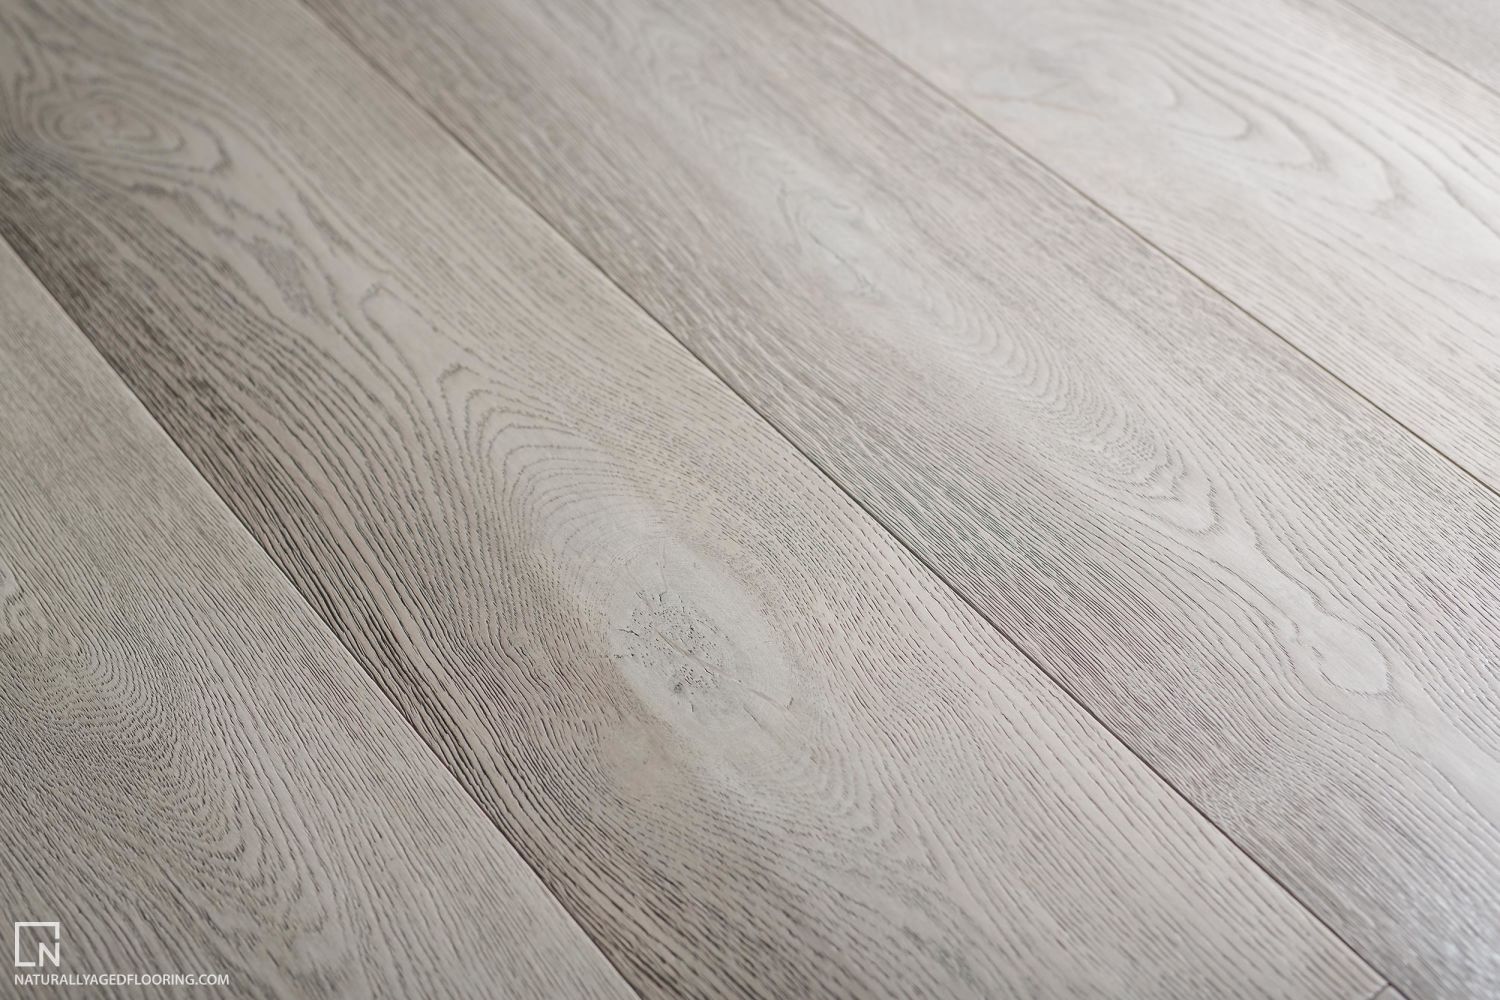 Naturally Aged Flooring Premier Collection Seafoam MC-SF-9.5